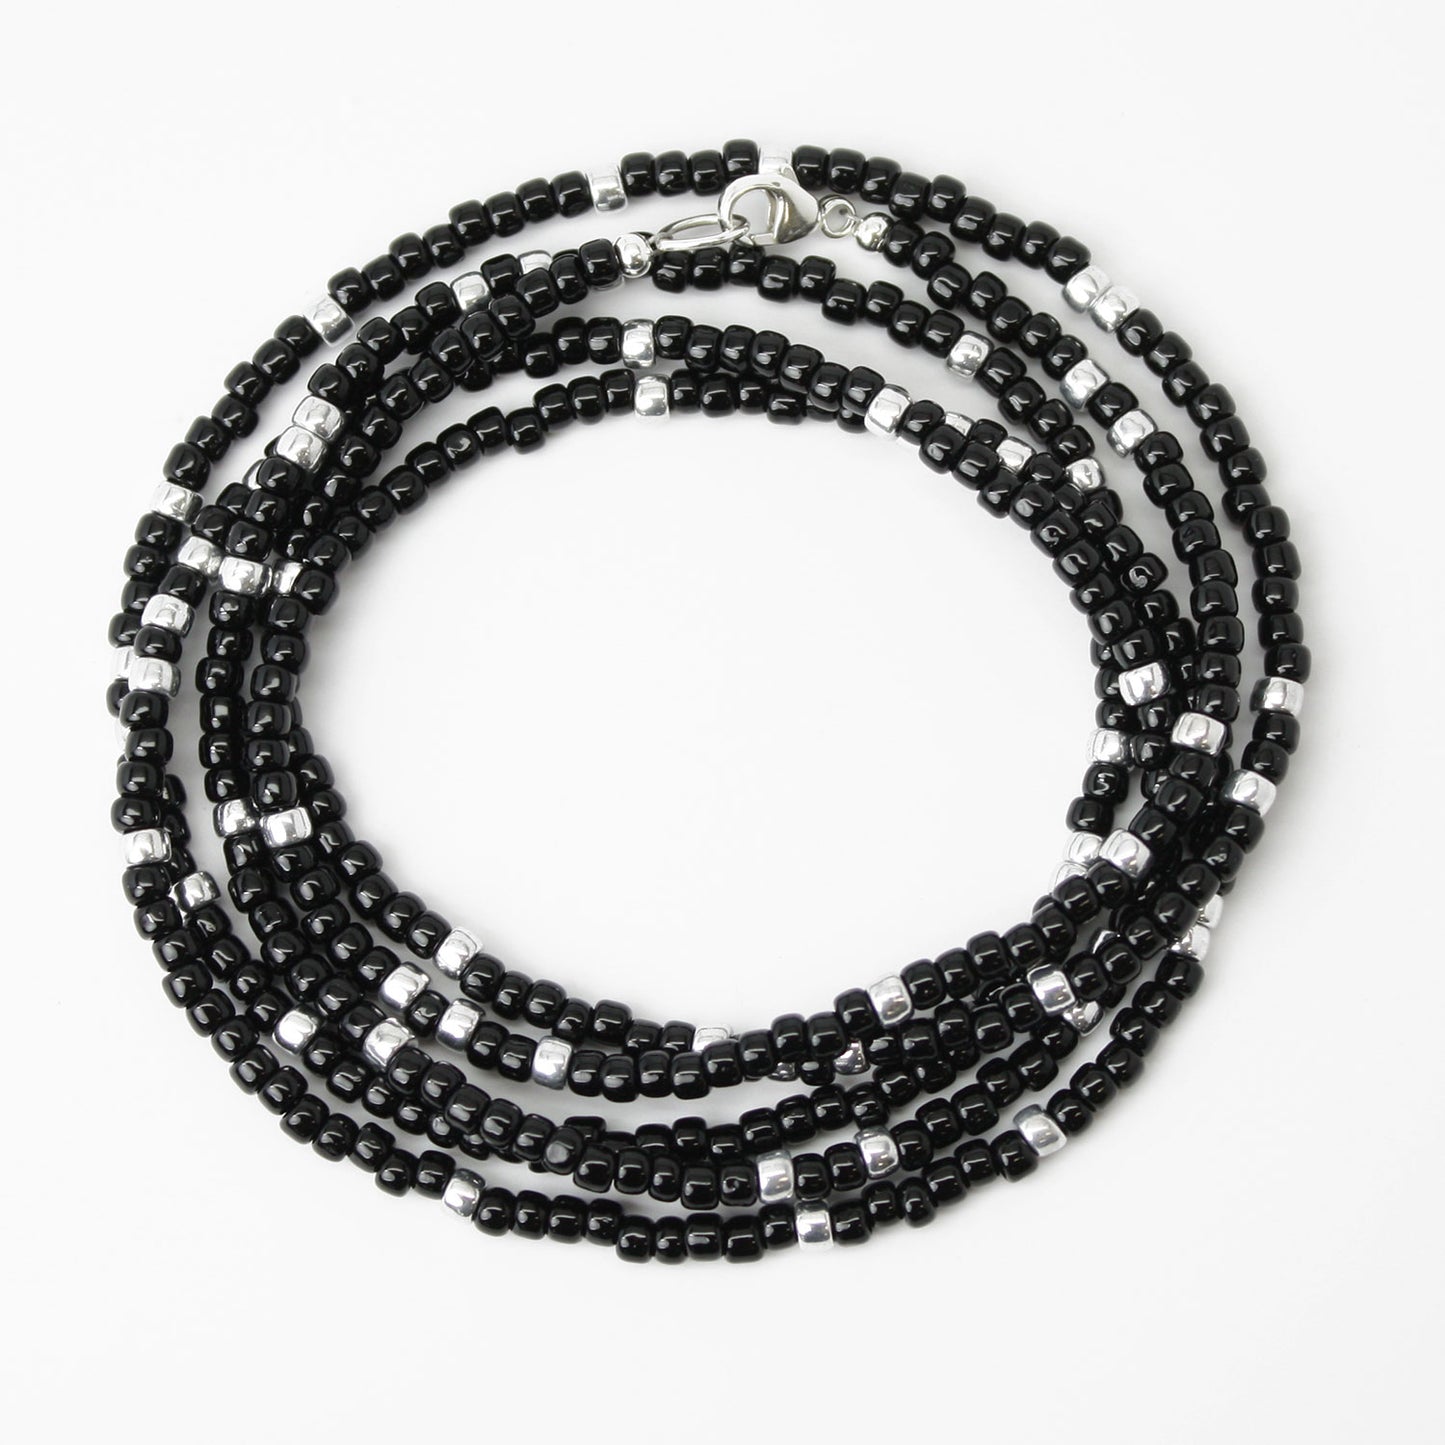 Realdivinas Stylish Black Beads Long Necklace Crystal Mala for Men -  Multipurpose Fancy Attractive Style Black Stone